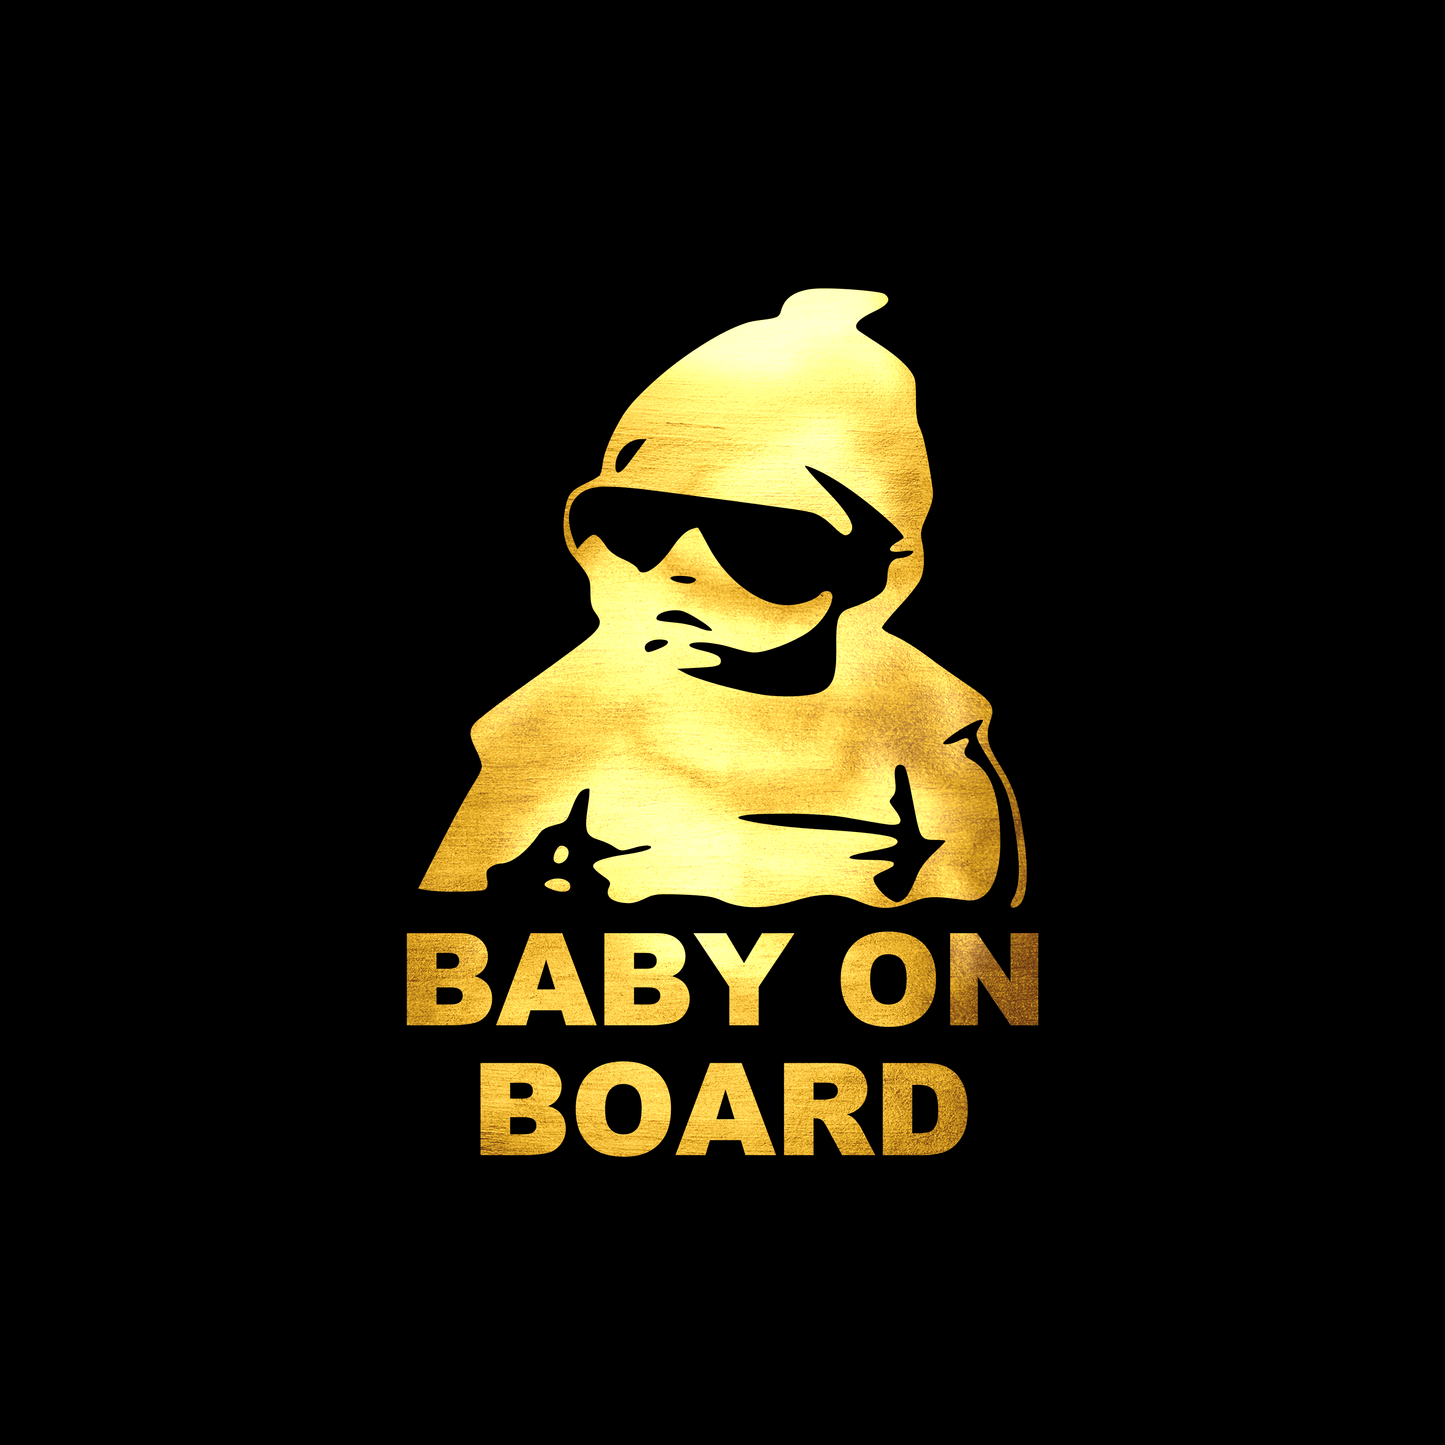 Baby on board 1 sticker decal